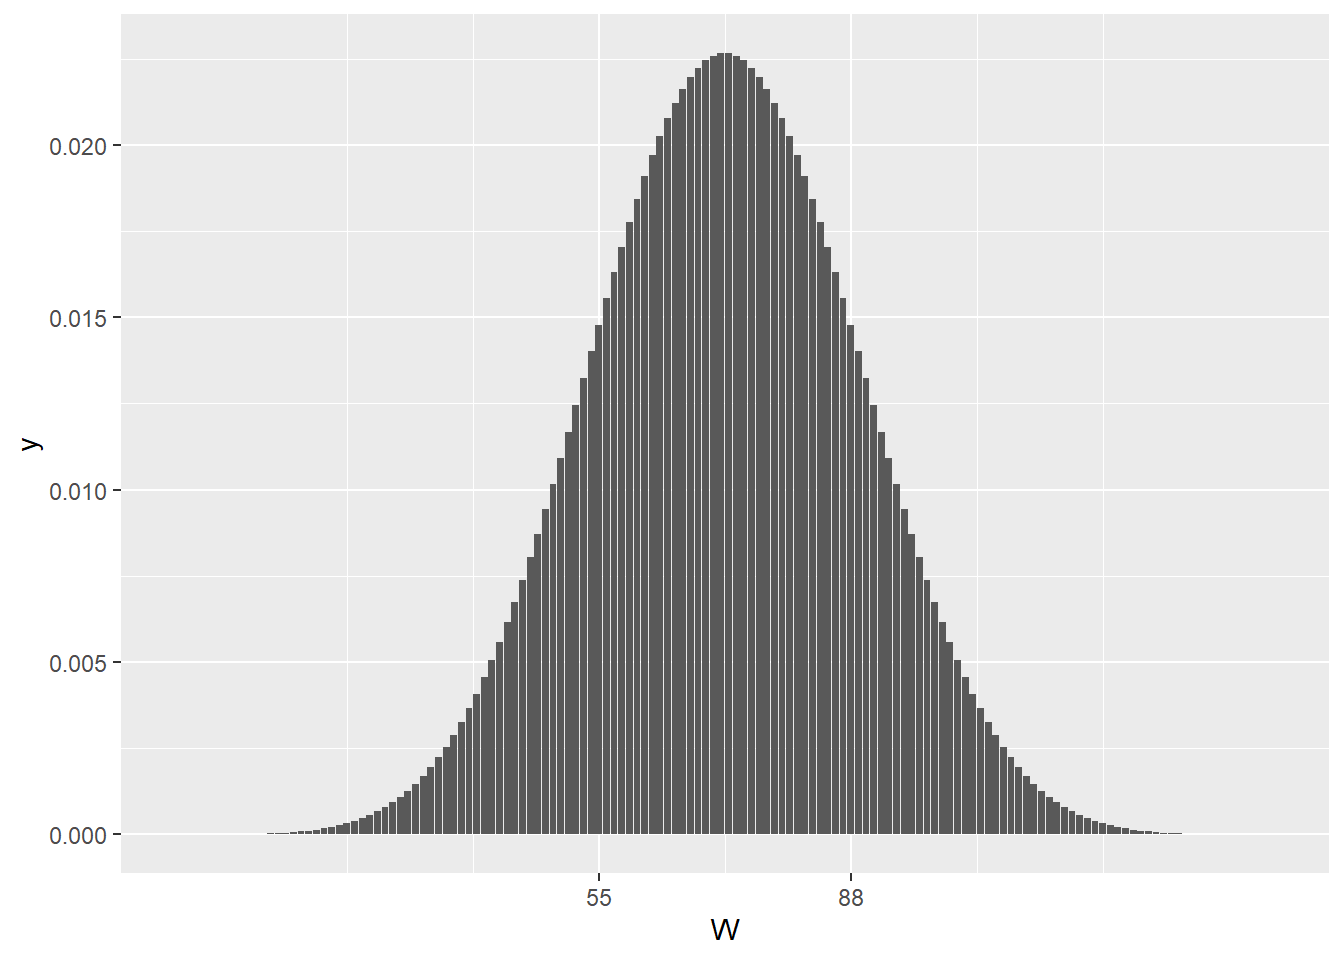 The null rank sum test statistic distribution for a sample size of m=11 and n=13